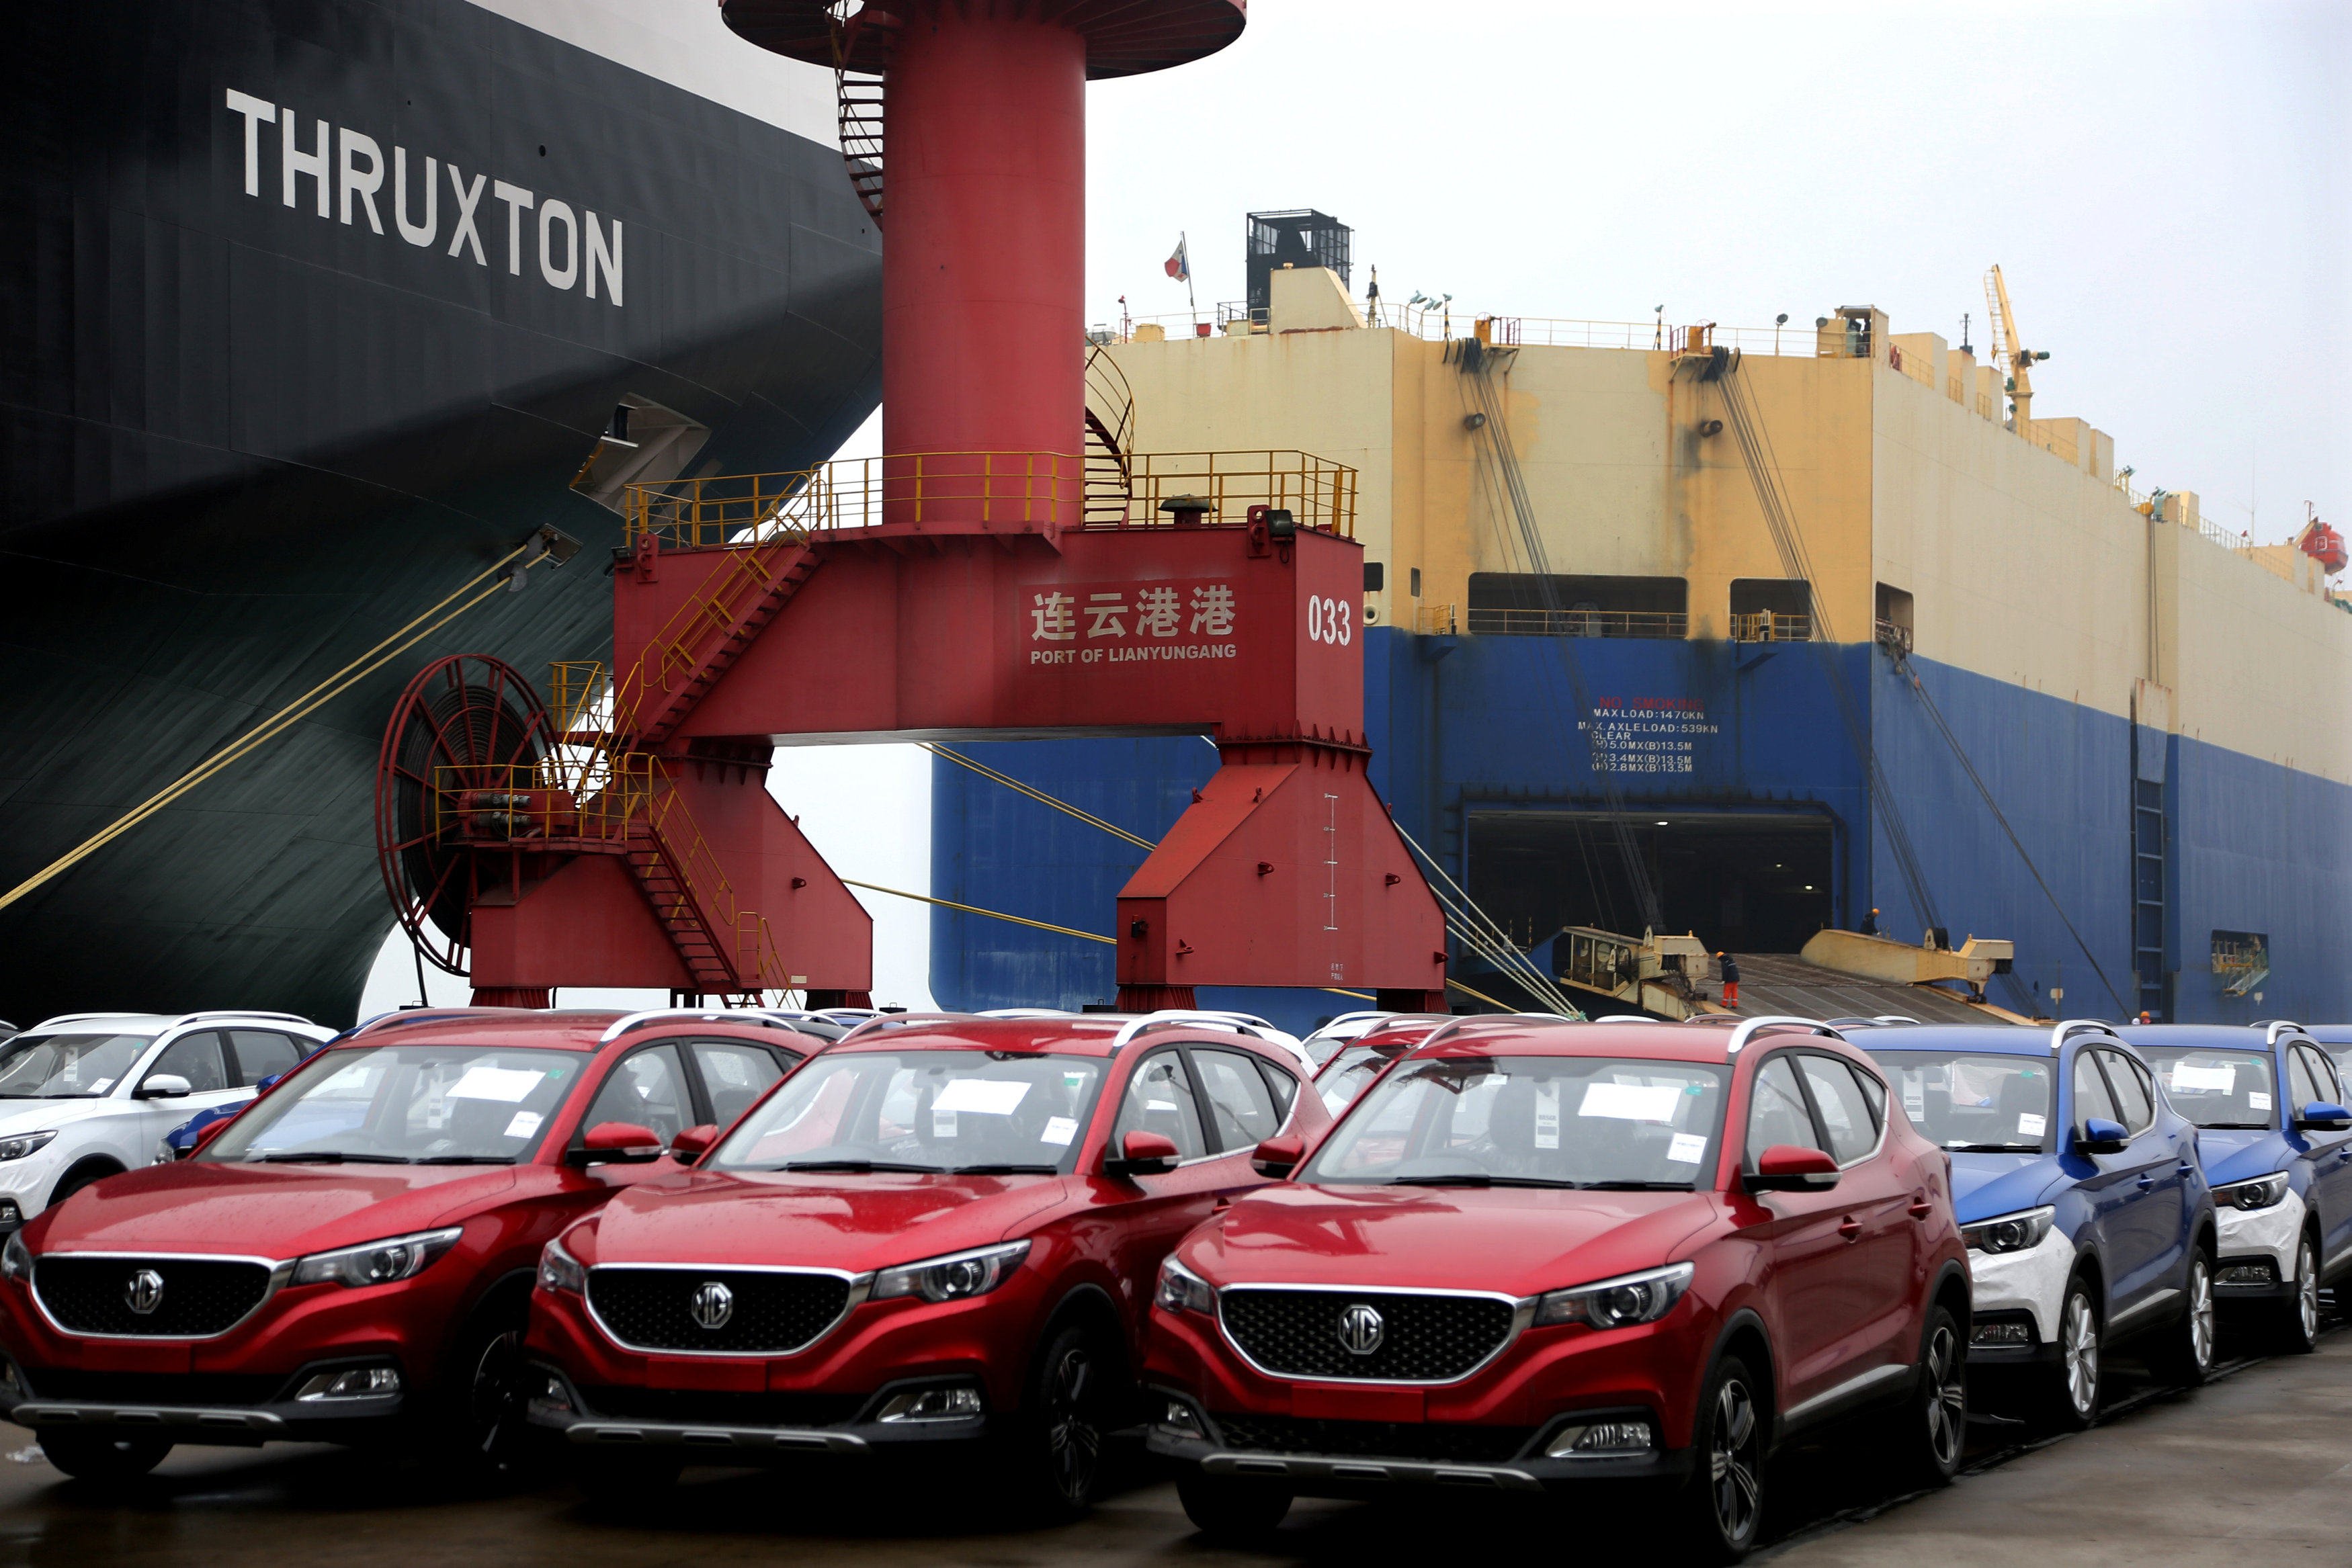 MG cars for export wait to be loaded onto a cargo vessel at a port in Lianyungang, Jiangsu province. Photo: Reuters